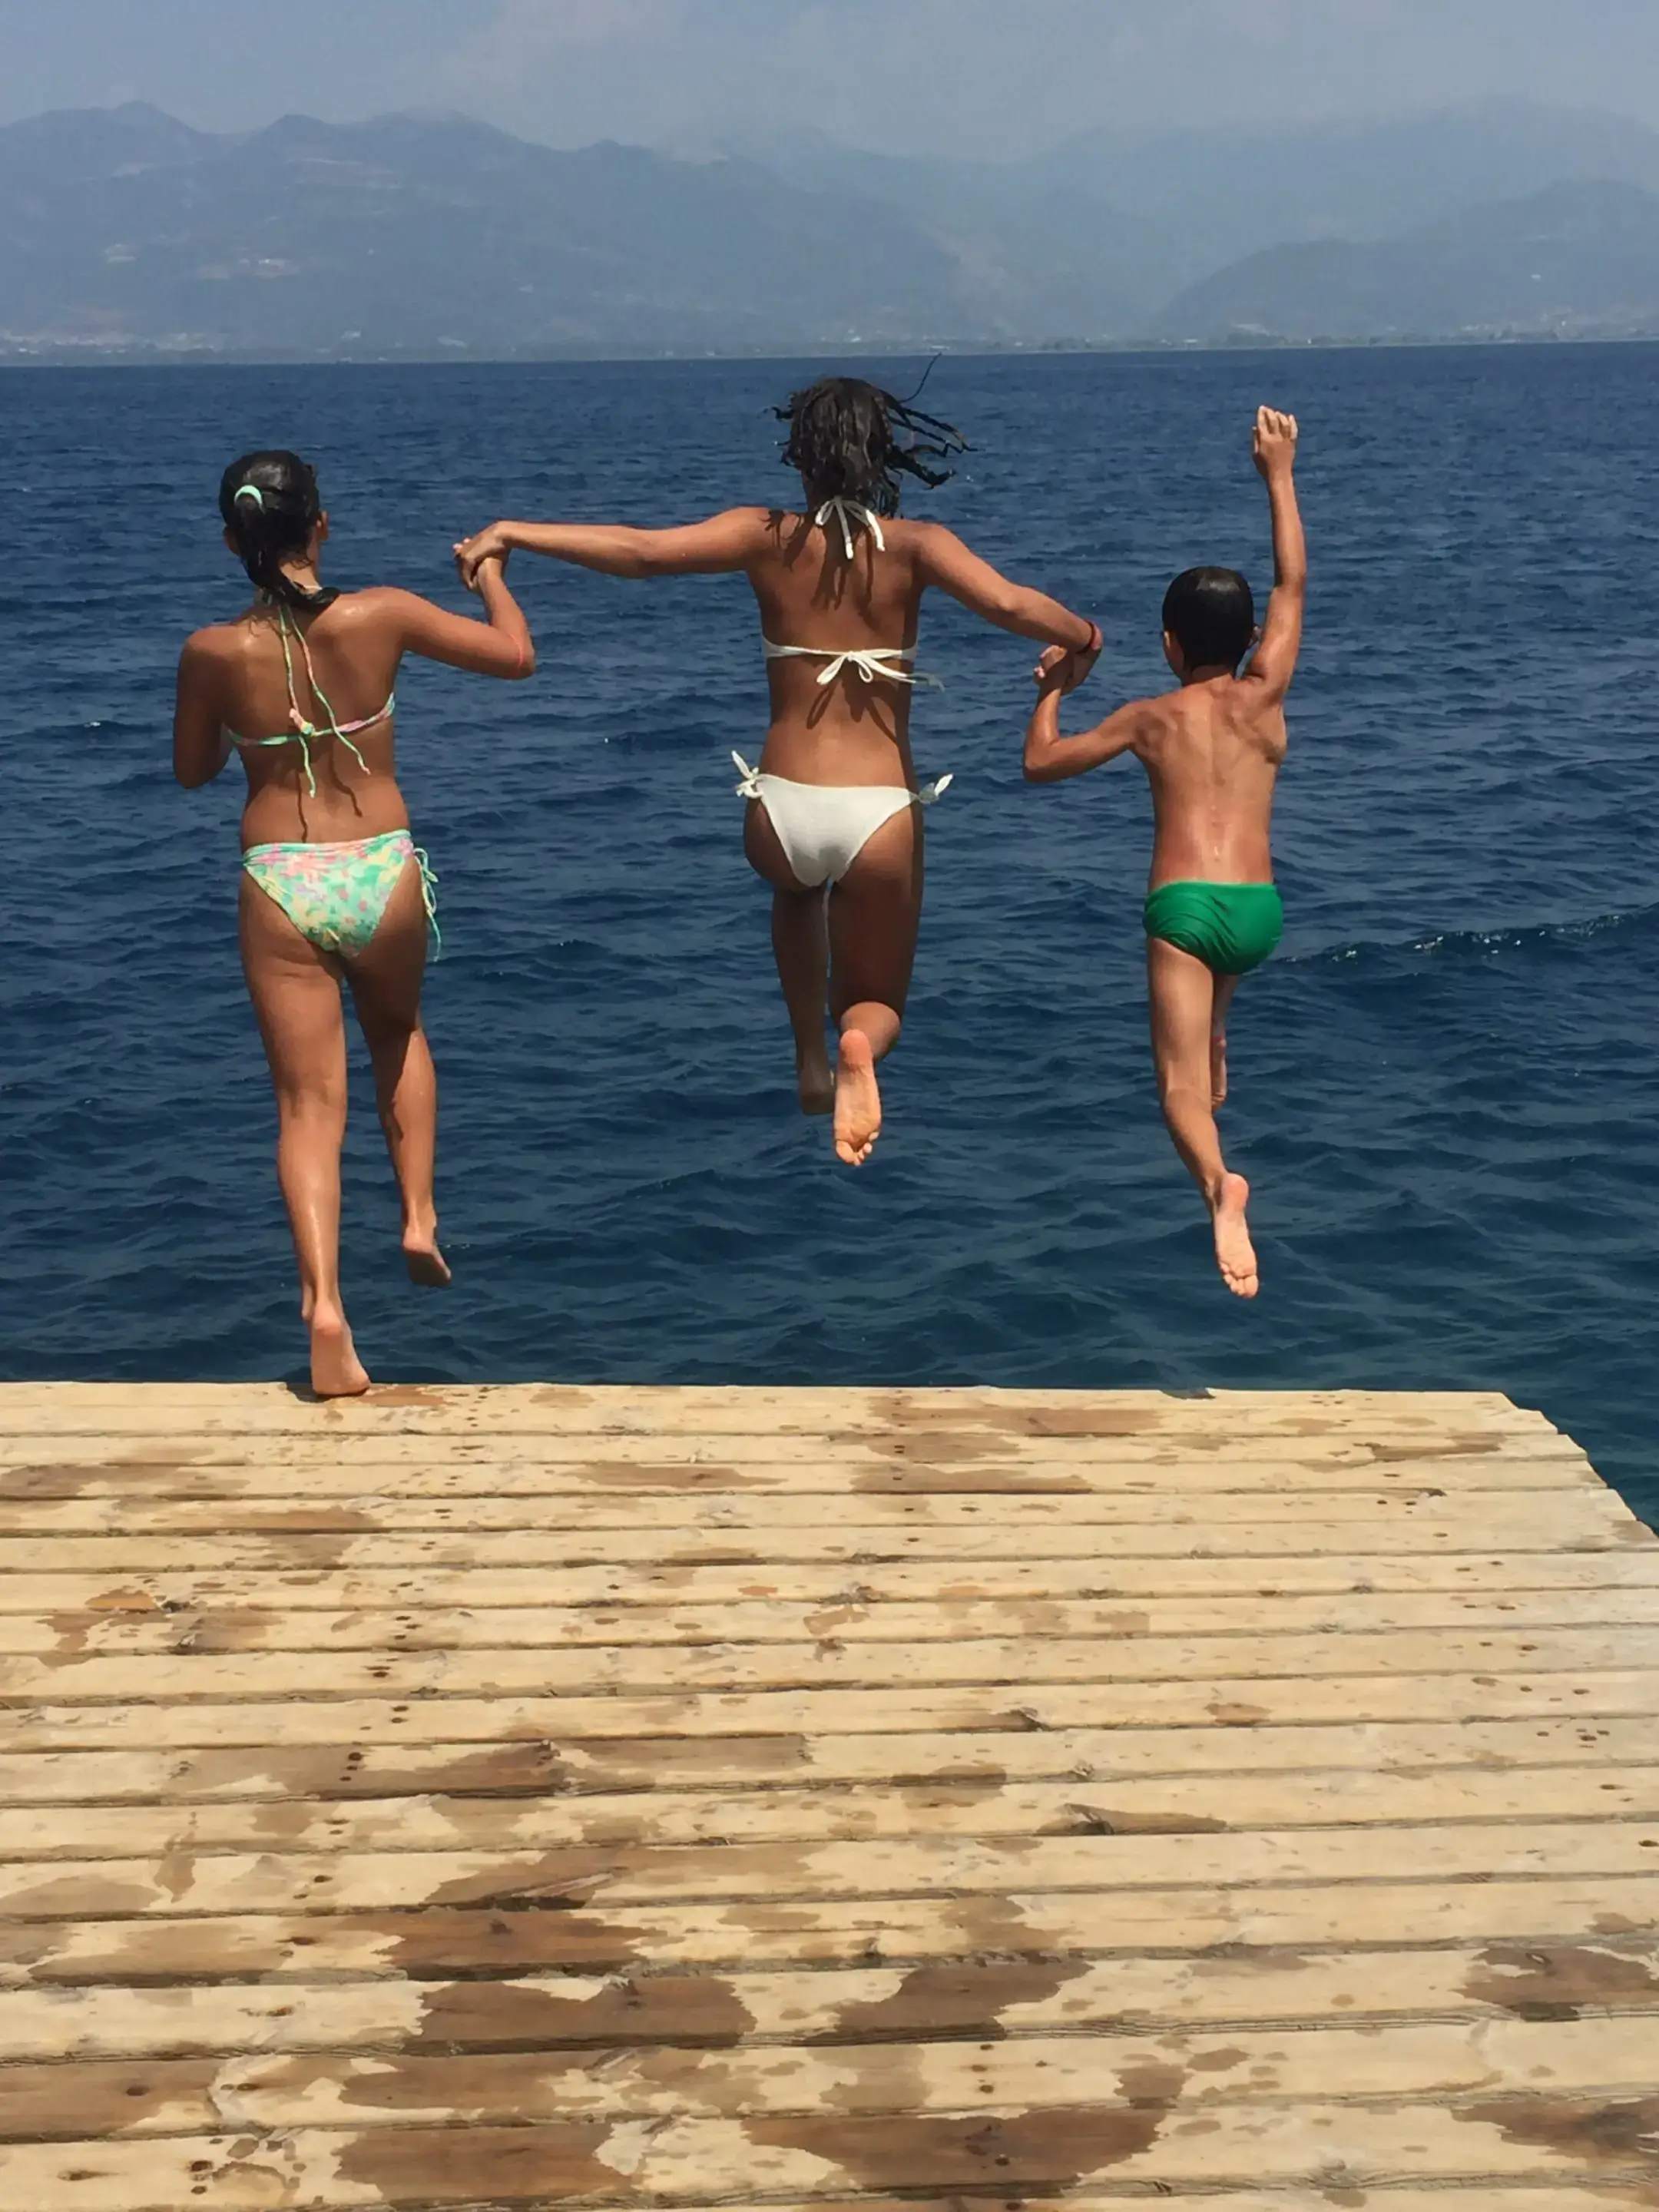 Three people jumping off a pier into the ocean.